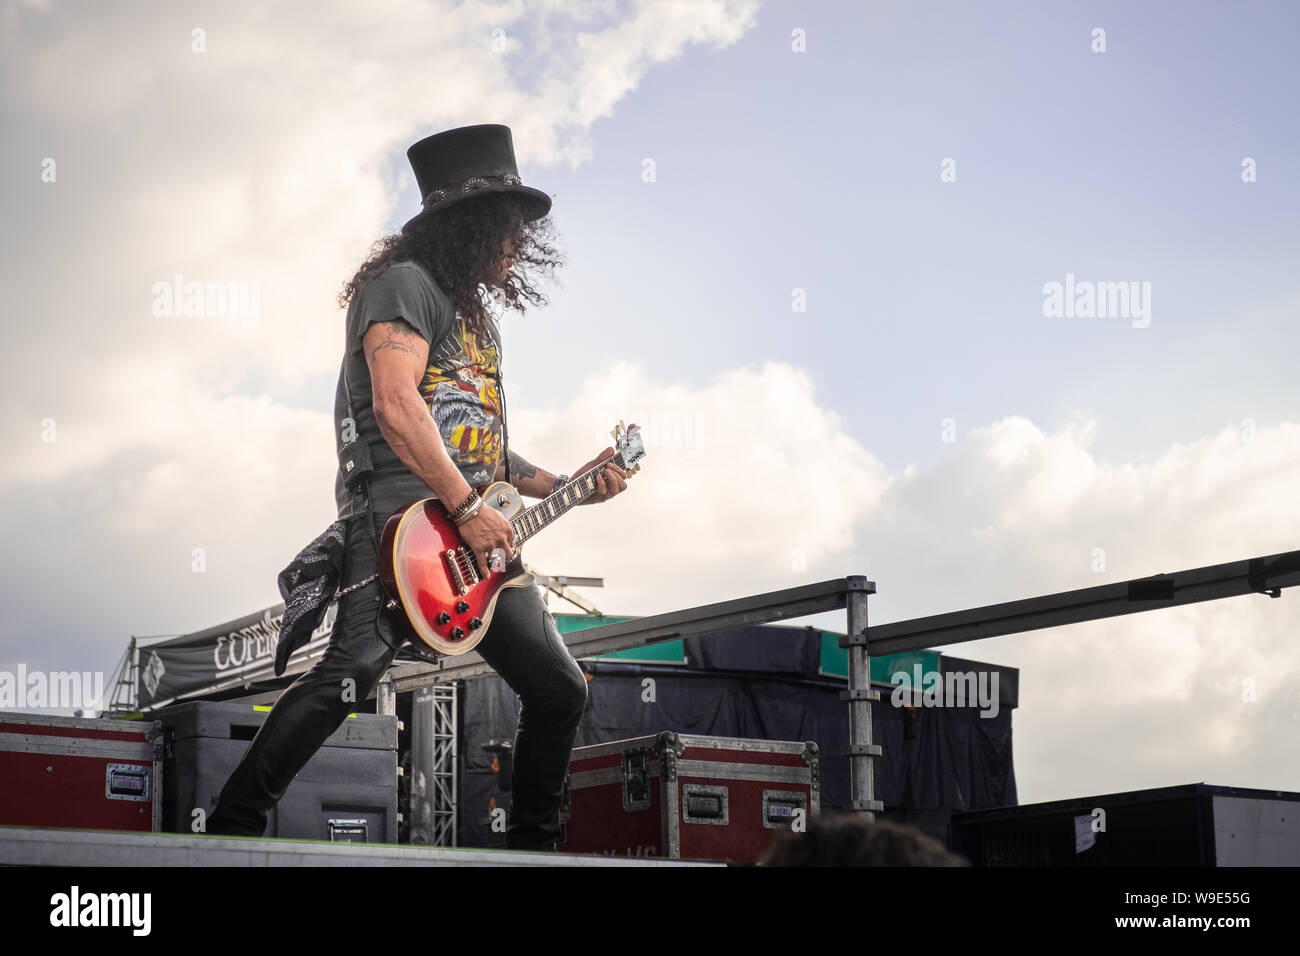 Slash featuring Myles Kennedy and the Conspirators on stage at the 2019 Copenhell Festival in Copenhagen. Here Slash on guitar Stock Photo